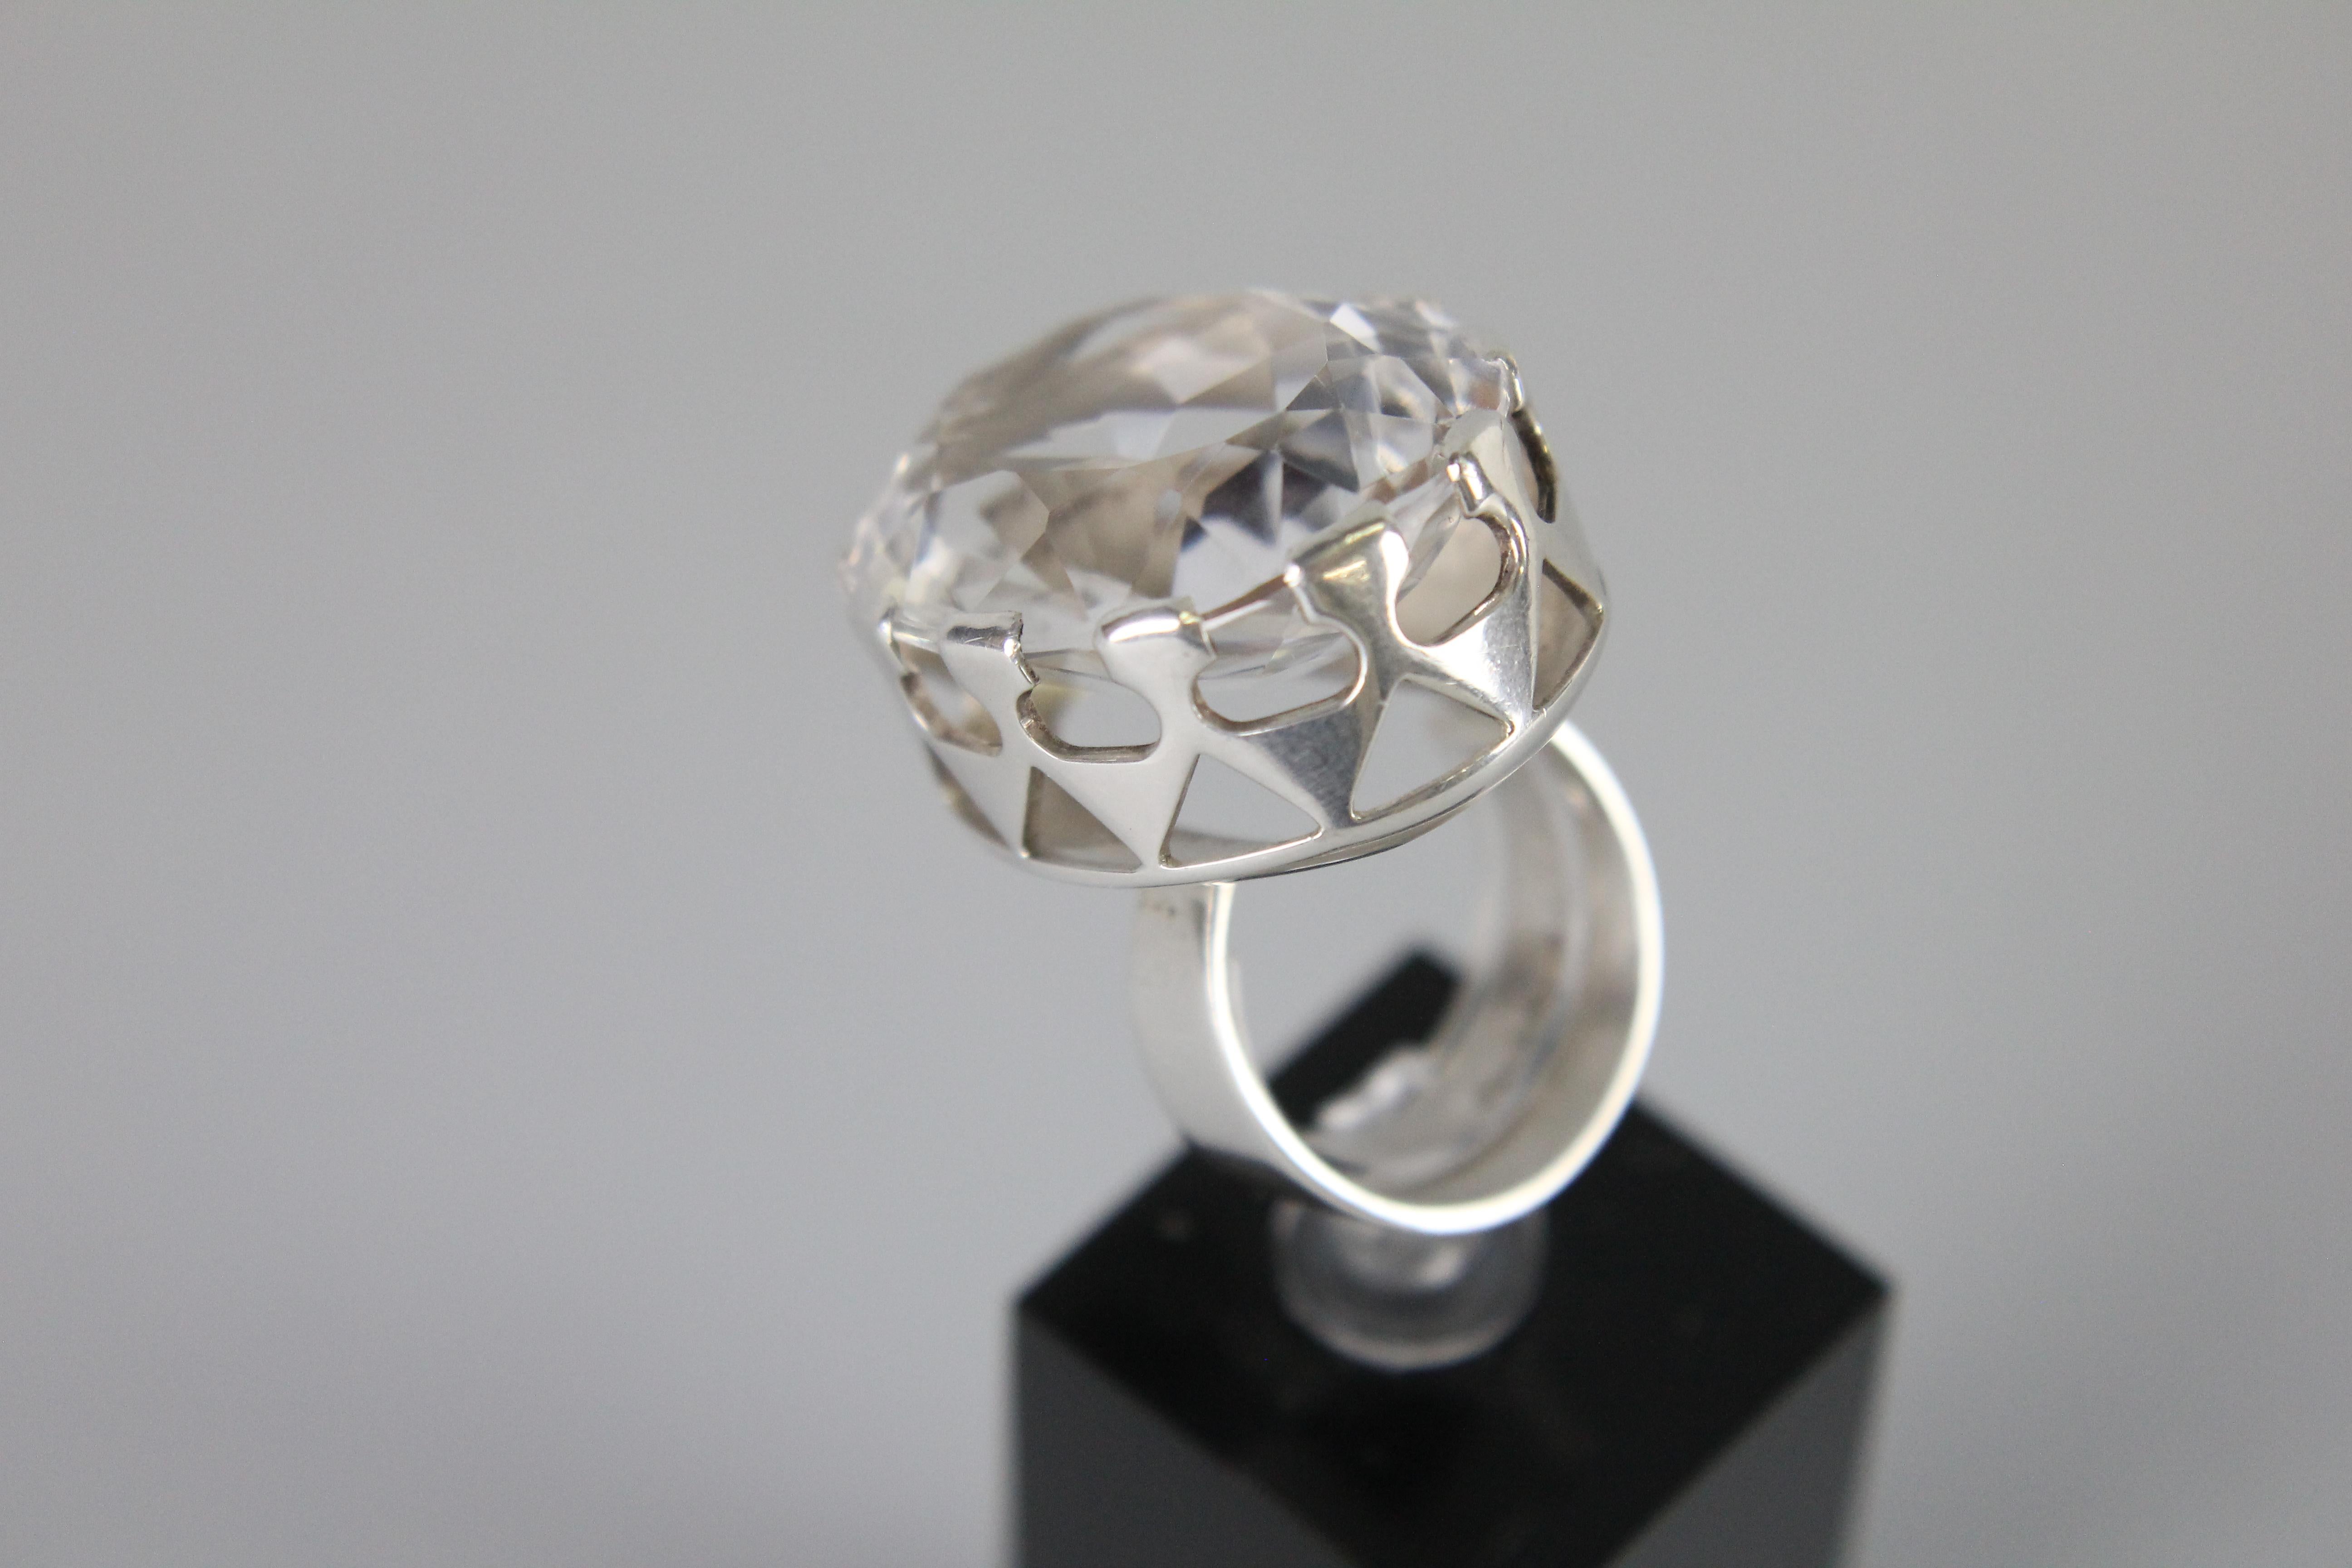 Modernist Ring in Silver and a Large Rock Crystal by Kaplan, Stockholm, 1968 For Sale 5